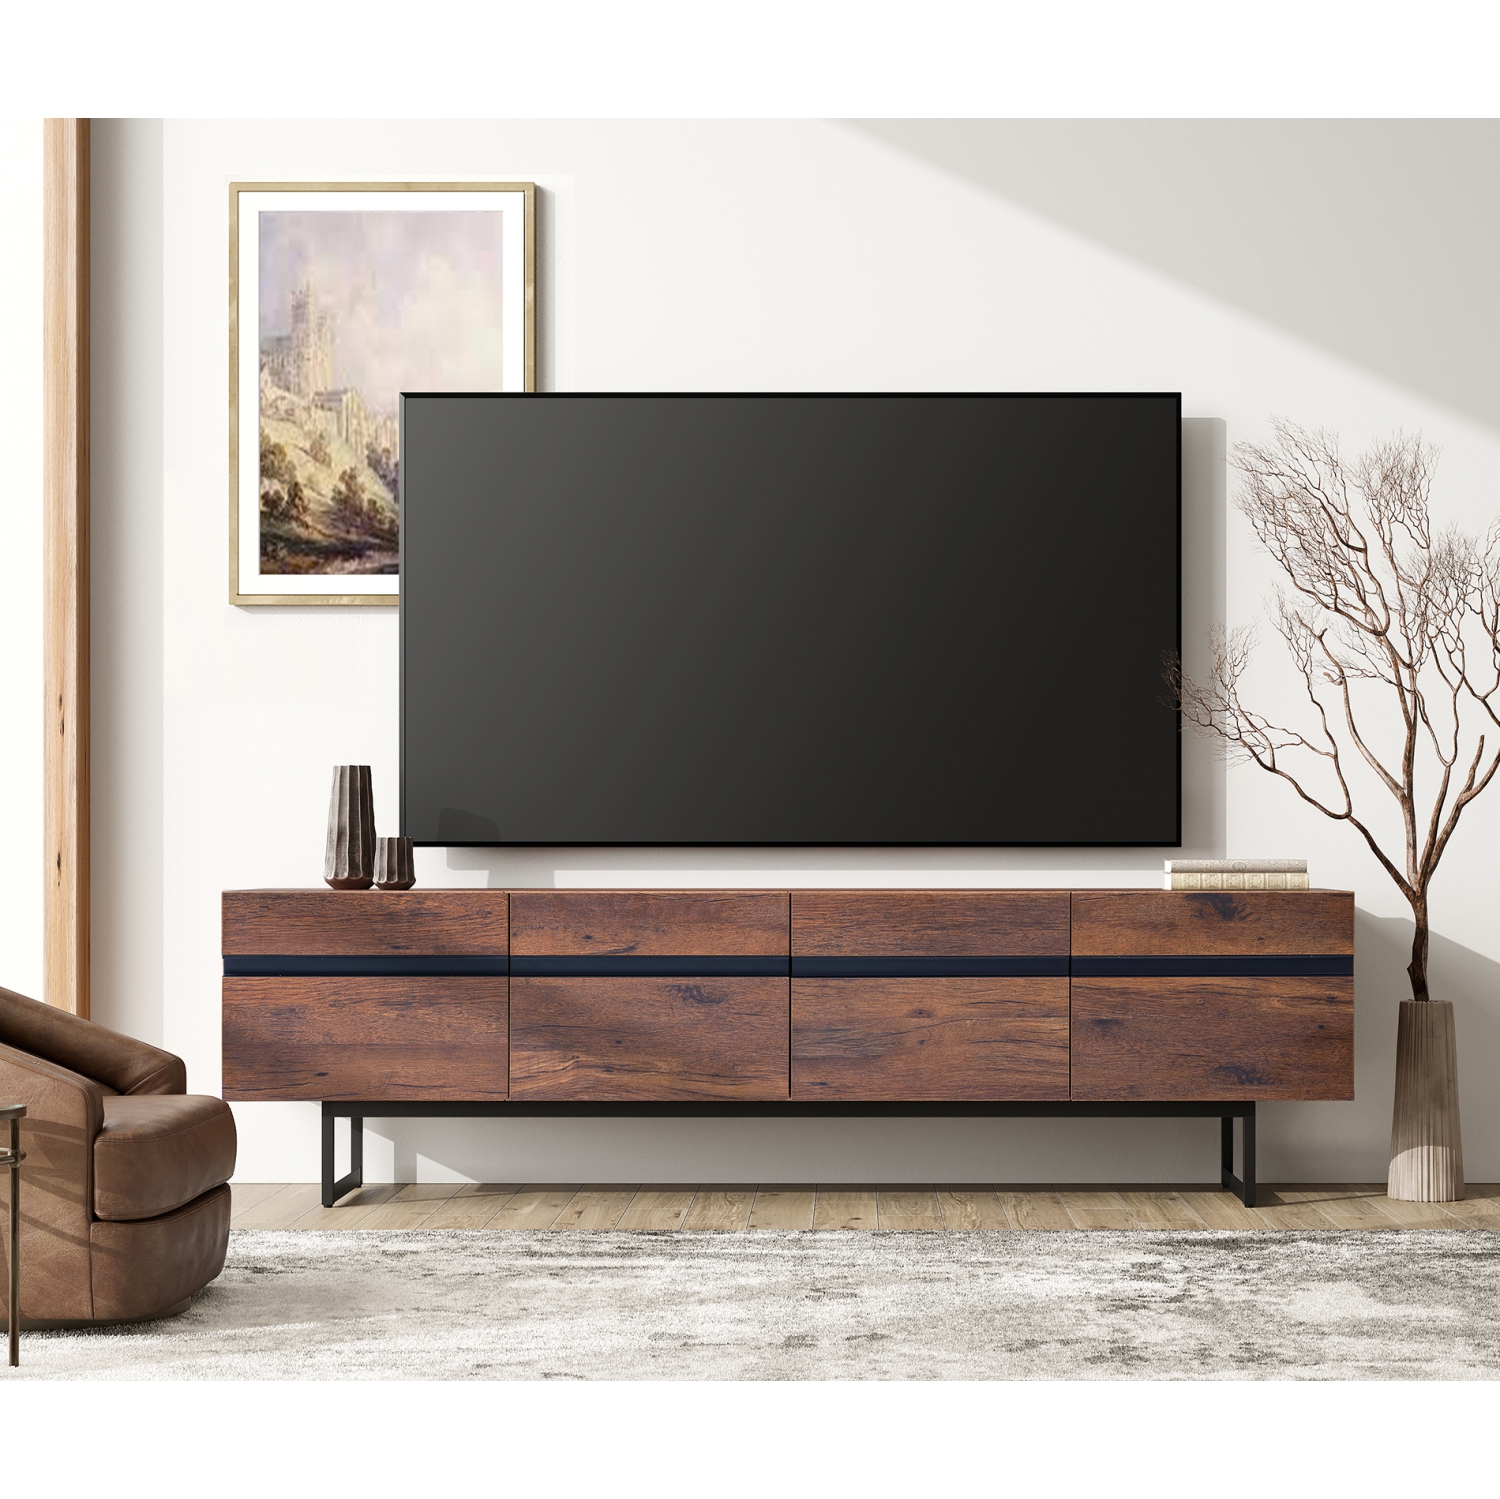 WAMPAT Modern 71" TV Stand for up to 75 inch TV Entertainment Center TV Console with Storage Cabinets Media Console for Living Room, Brown